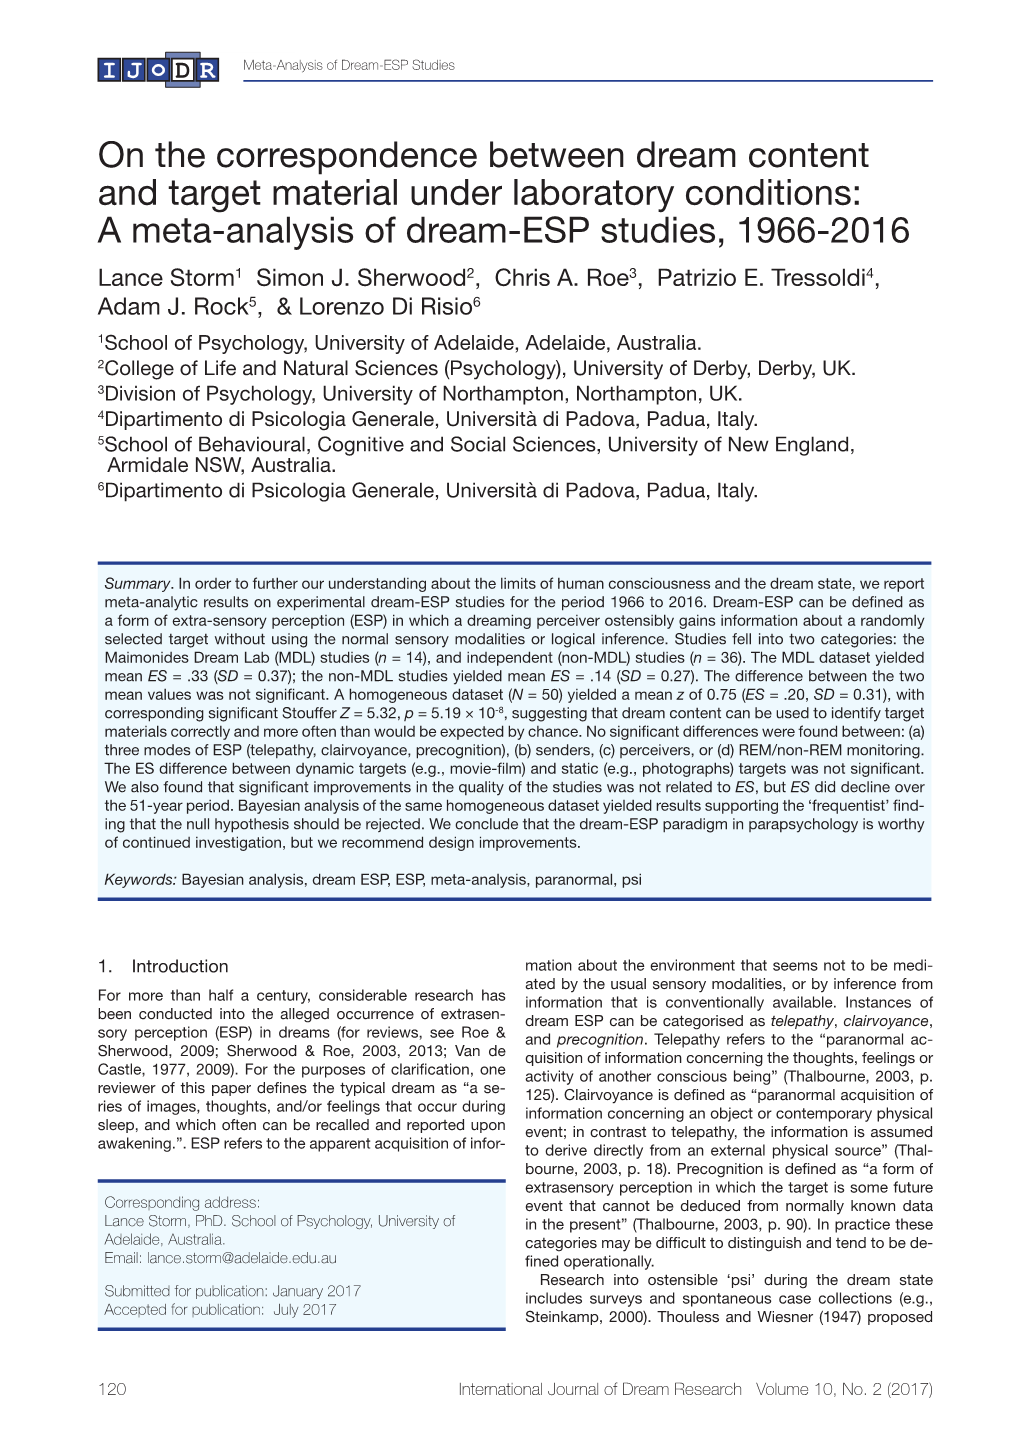 On the Correspondence Between Dream Content and Target Material Under Laboratory Conditions: a Meta-Analysis of Dream-ESP Studies, 1966-2016 Lance Storm1 Simon J